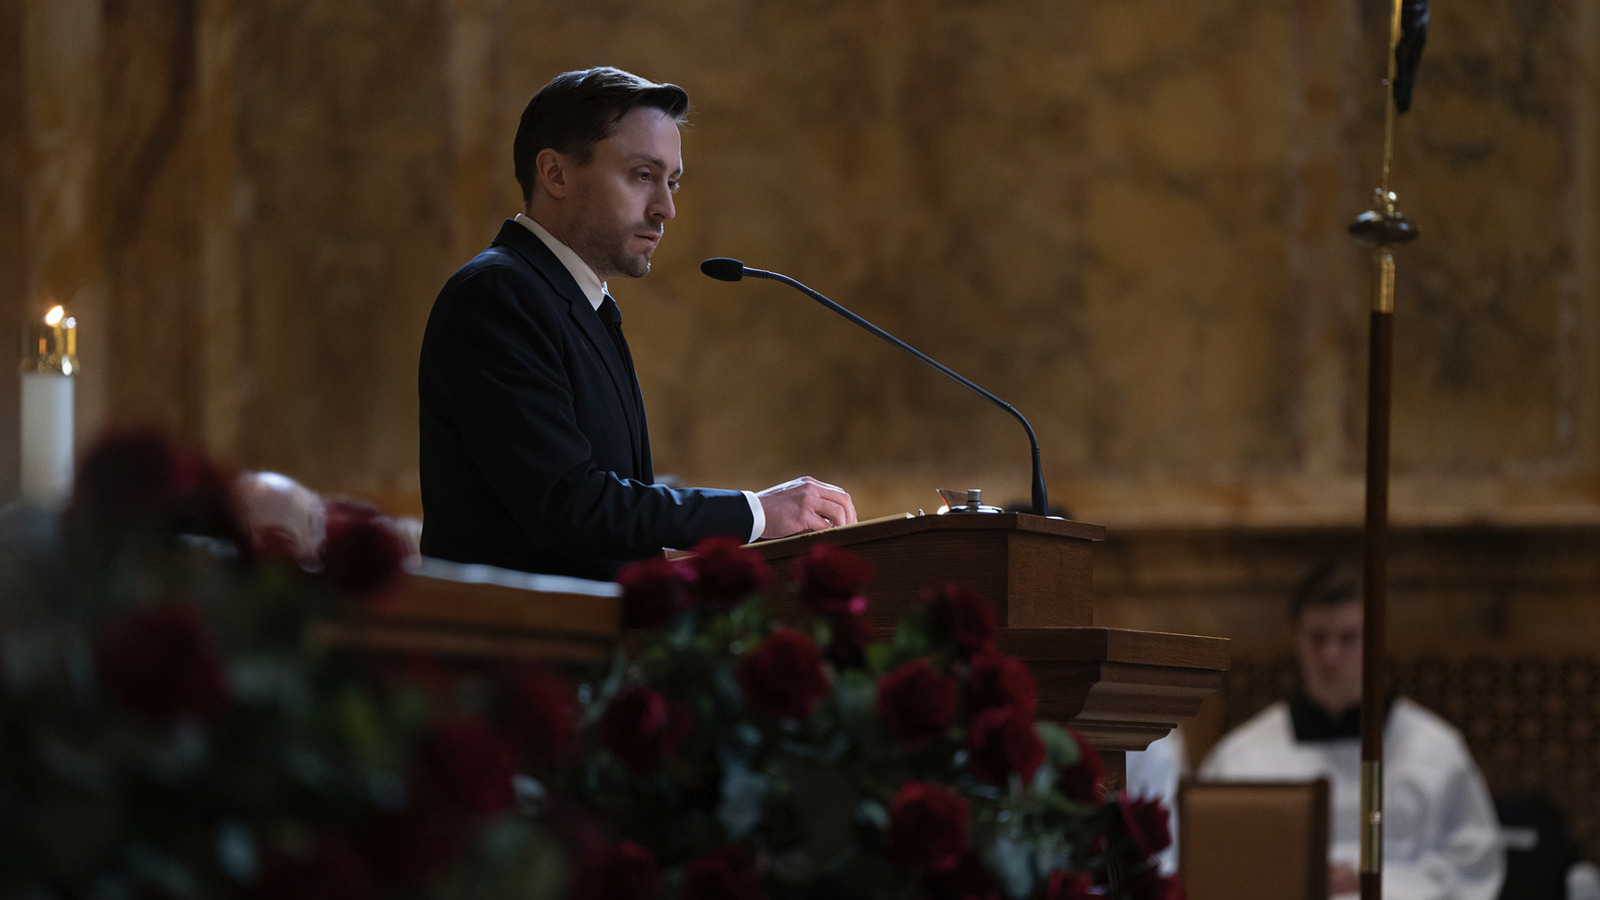 Succession’s grand funeral sequence was cut together from massive long takes